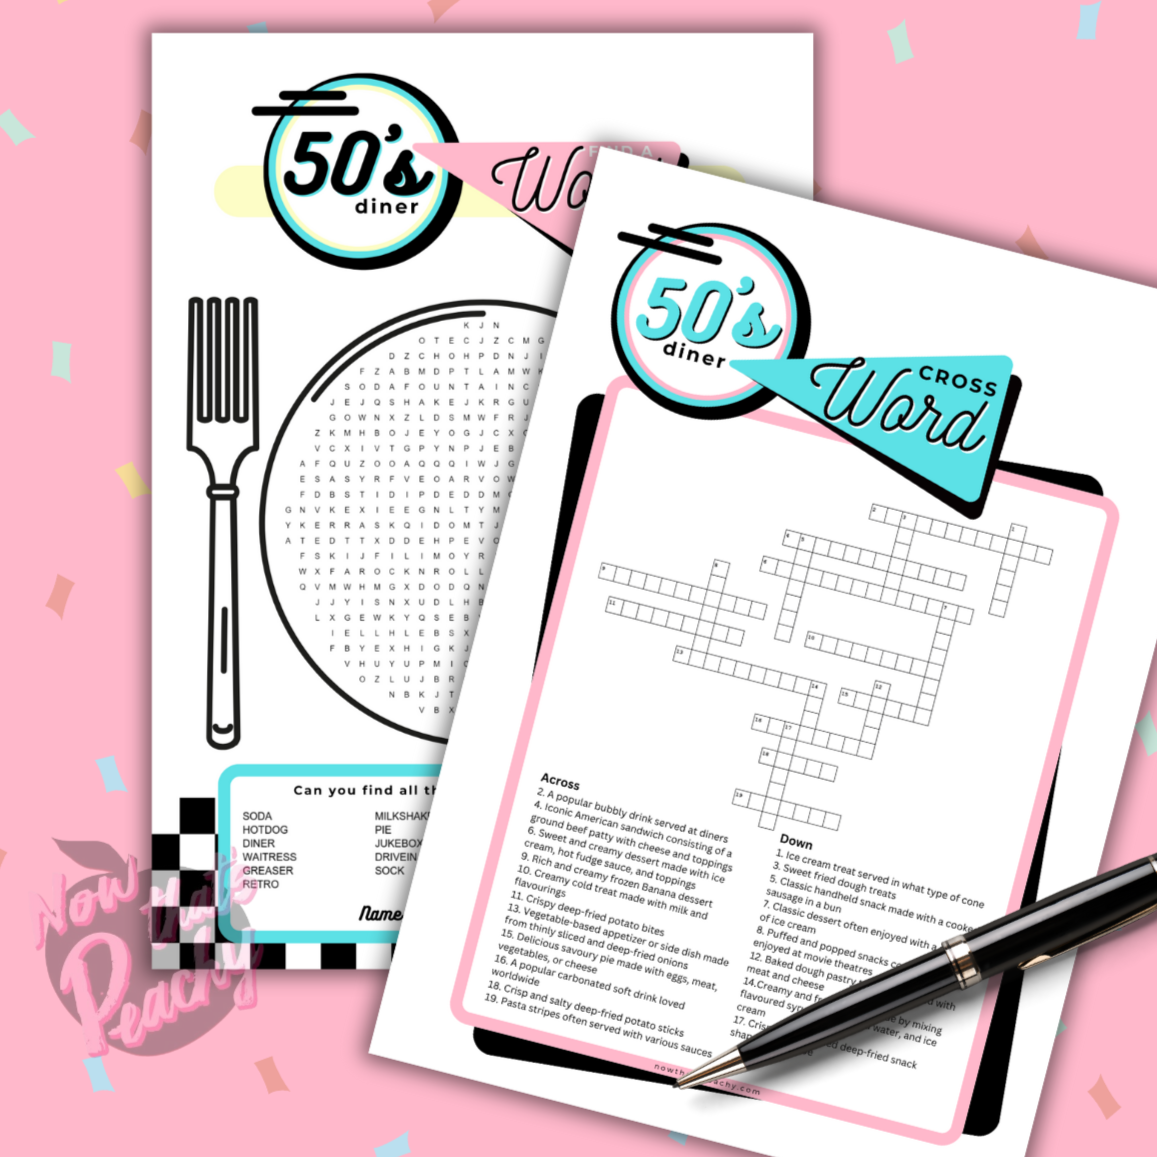 DINER themed 1950's find a word crossword Game Party PRINTABLE pack, Rock'n'roll Sock Hop Retro 50s Birthday fifties Soda hop instant digital download quiz birthday kids teen adult all ages print off at home fun easy cheap Jukebox activity games